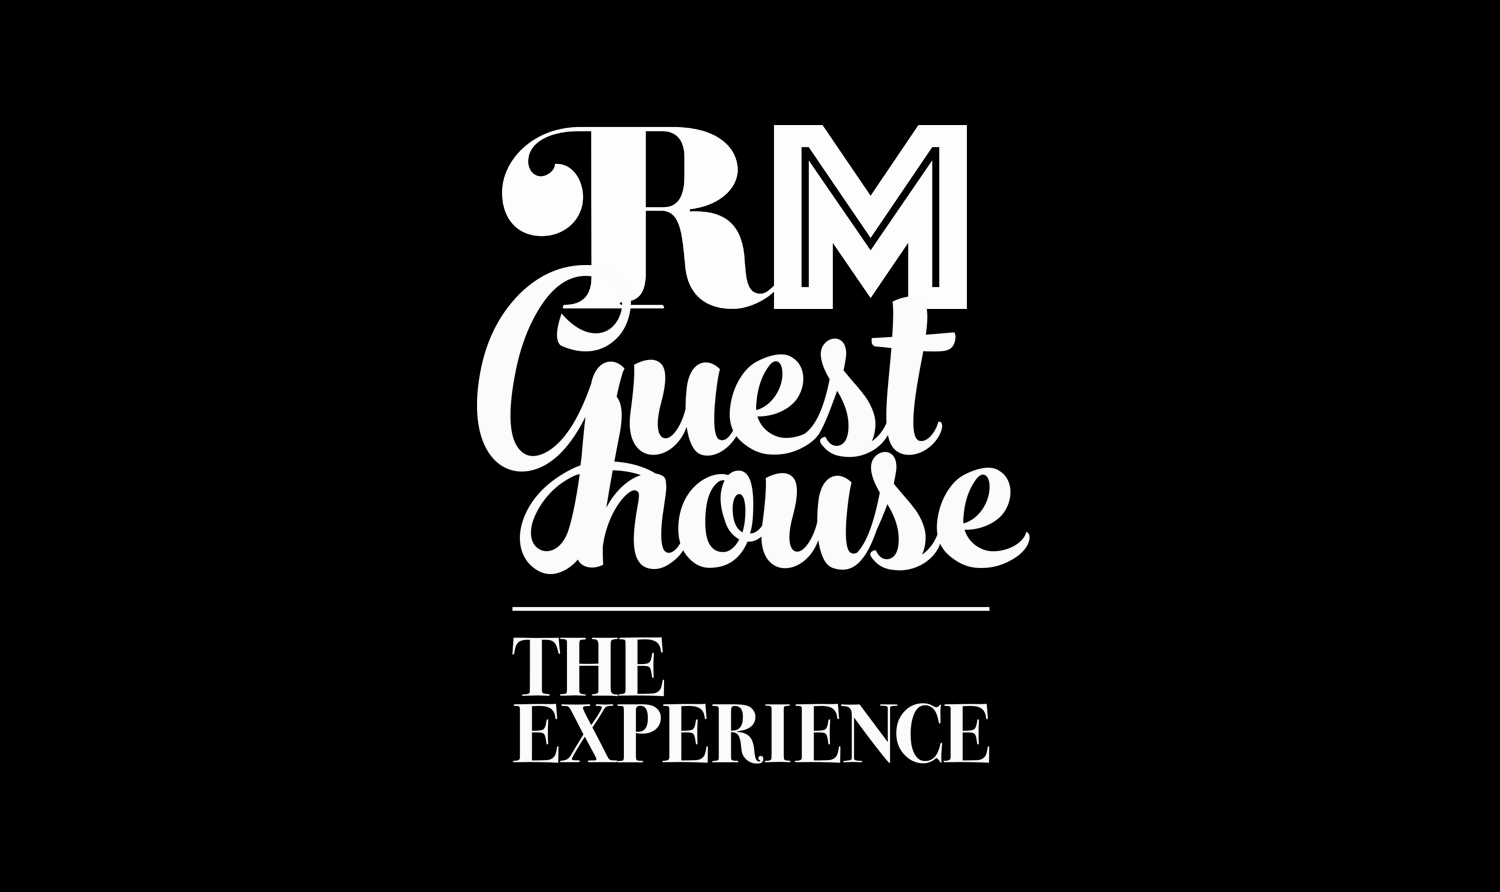 RM Guest House – The Experience